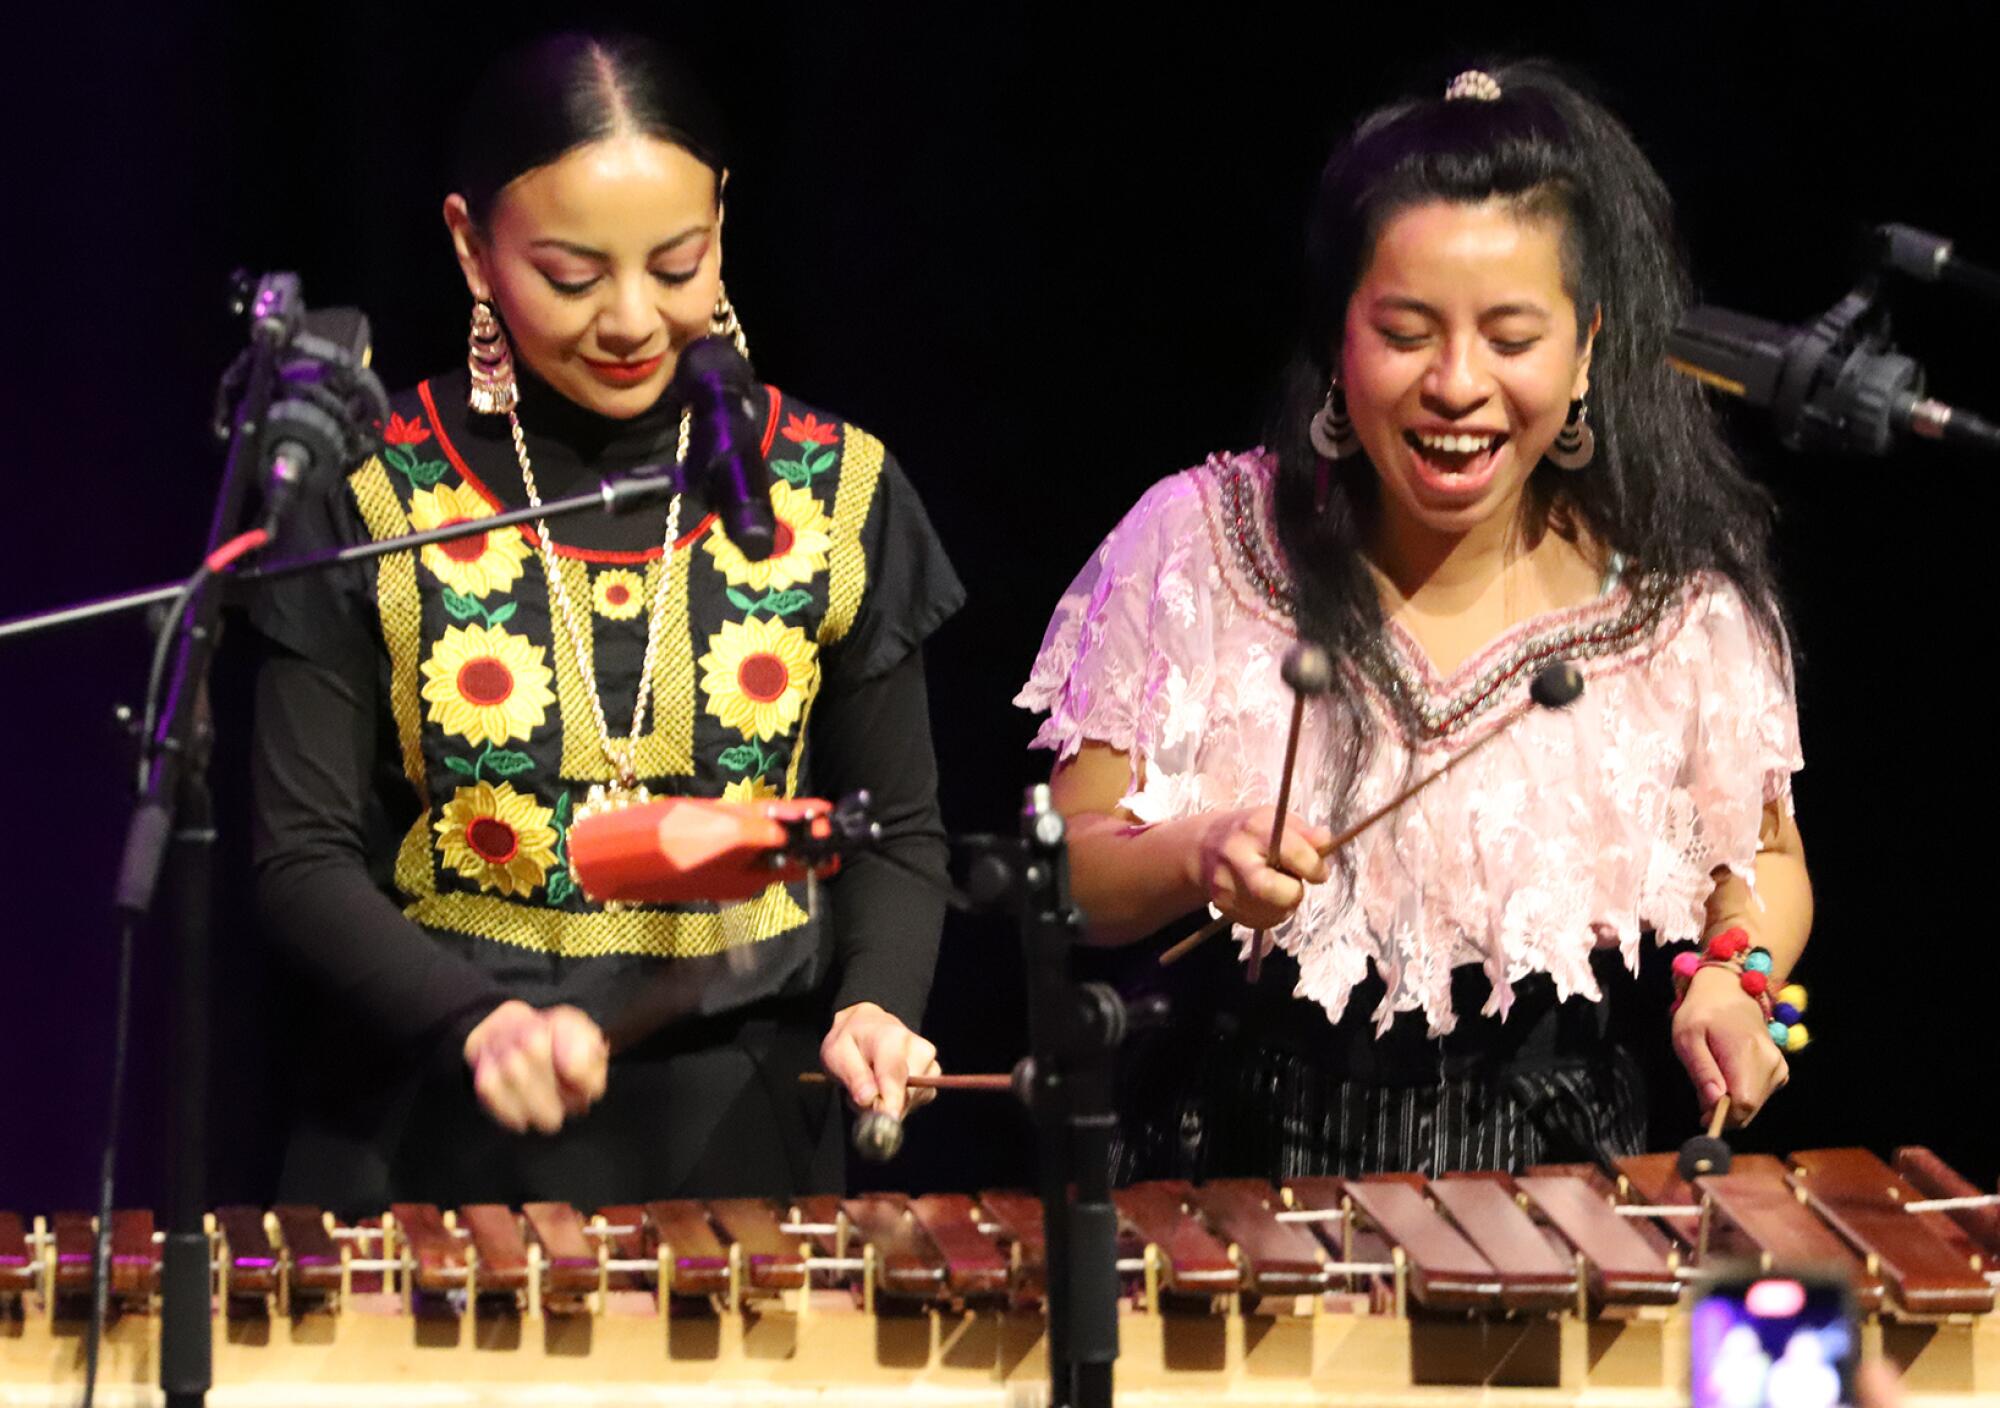 Two women, one dressed in a shirt with yellow-and-red flowers, hold sticks as they play a xylophone-like instrument